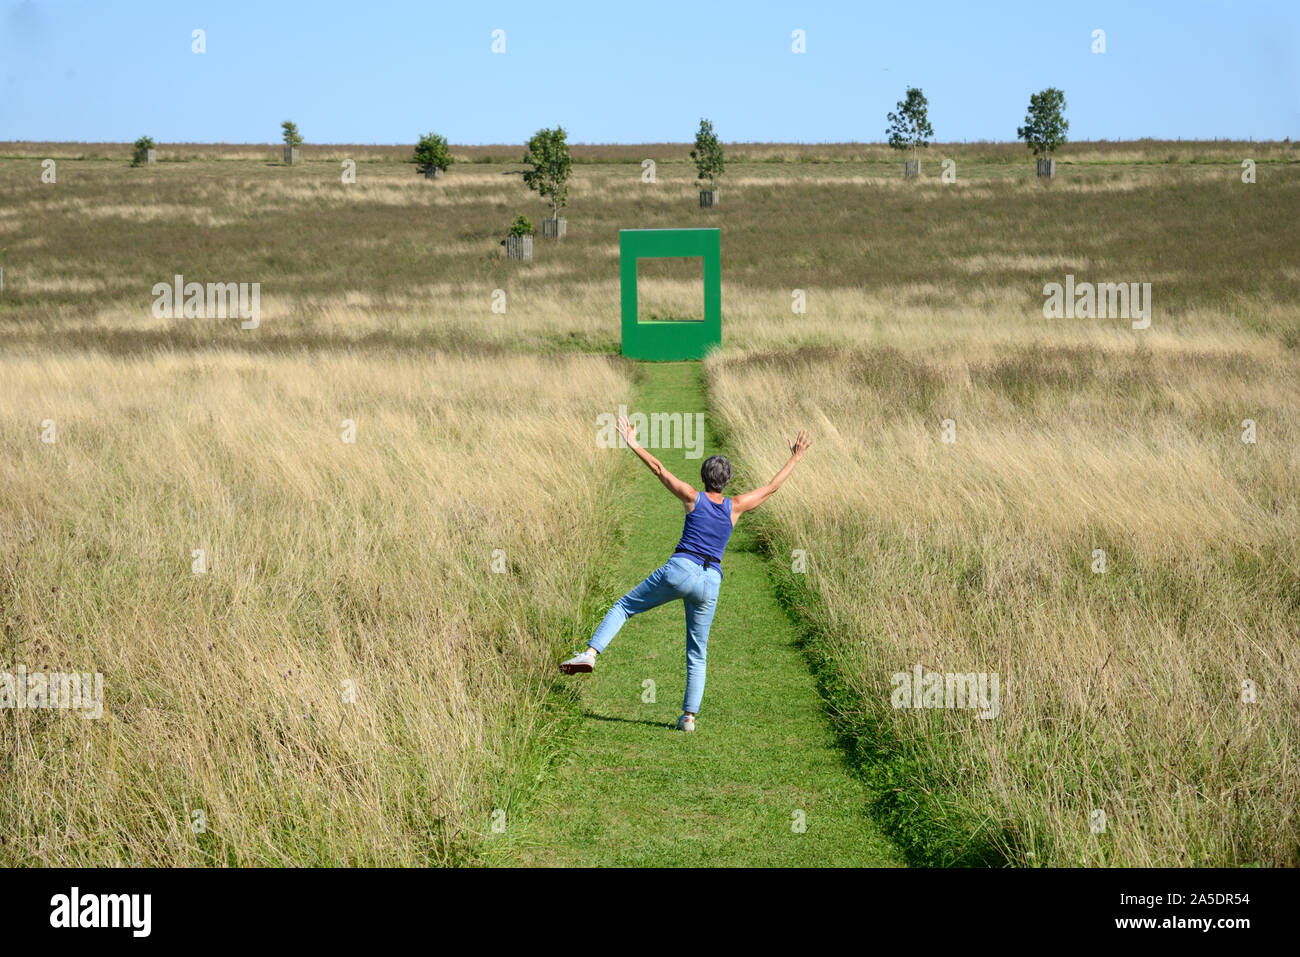 European Woman Fooling Around on Mown Grass in Field with Green Dwelling Art Installation by Krijn de Koning 2019 in Background Compton Verney England Stock Photo